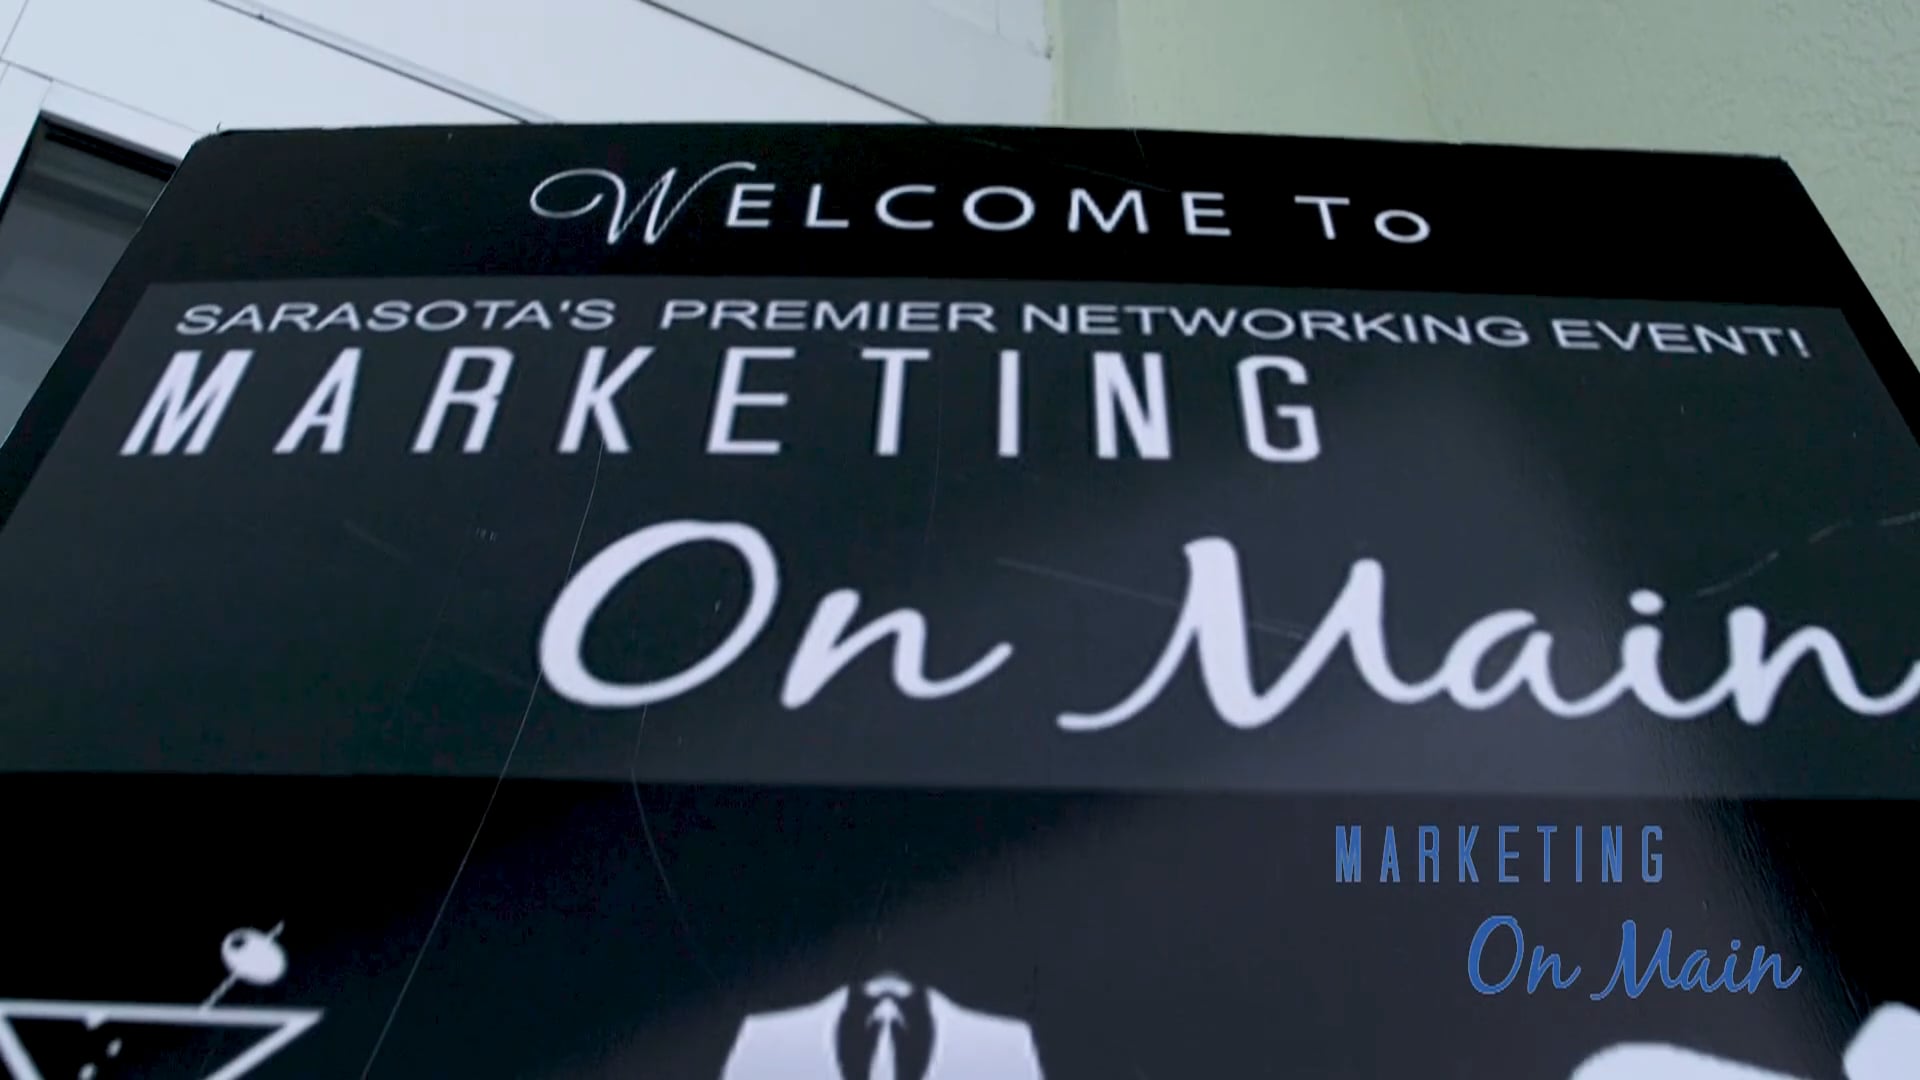 Marketing on Main - March 2018